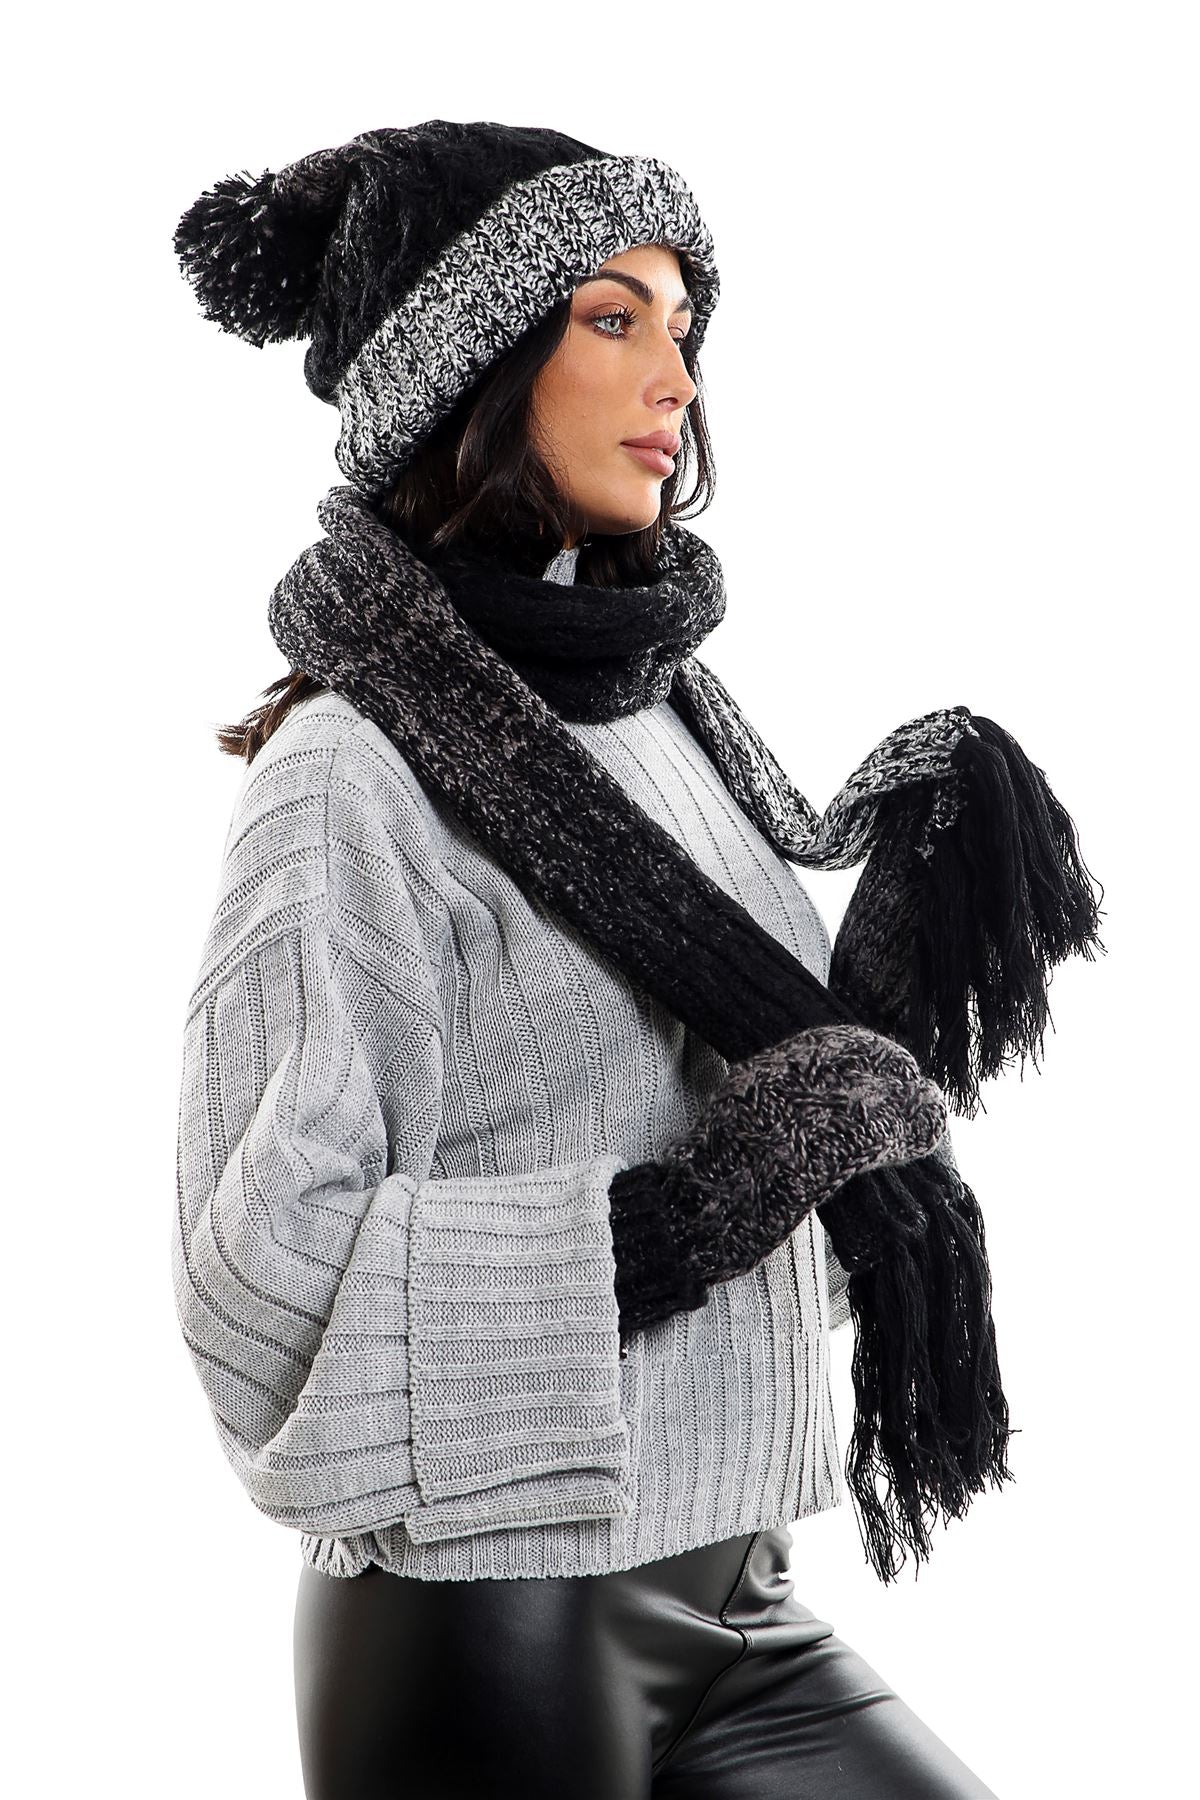 Womens LHTSF172 Wooly Thick knitted Hat, Scarf and Glove set -  Black & Grey